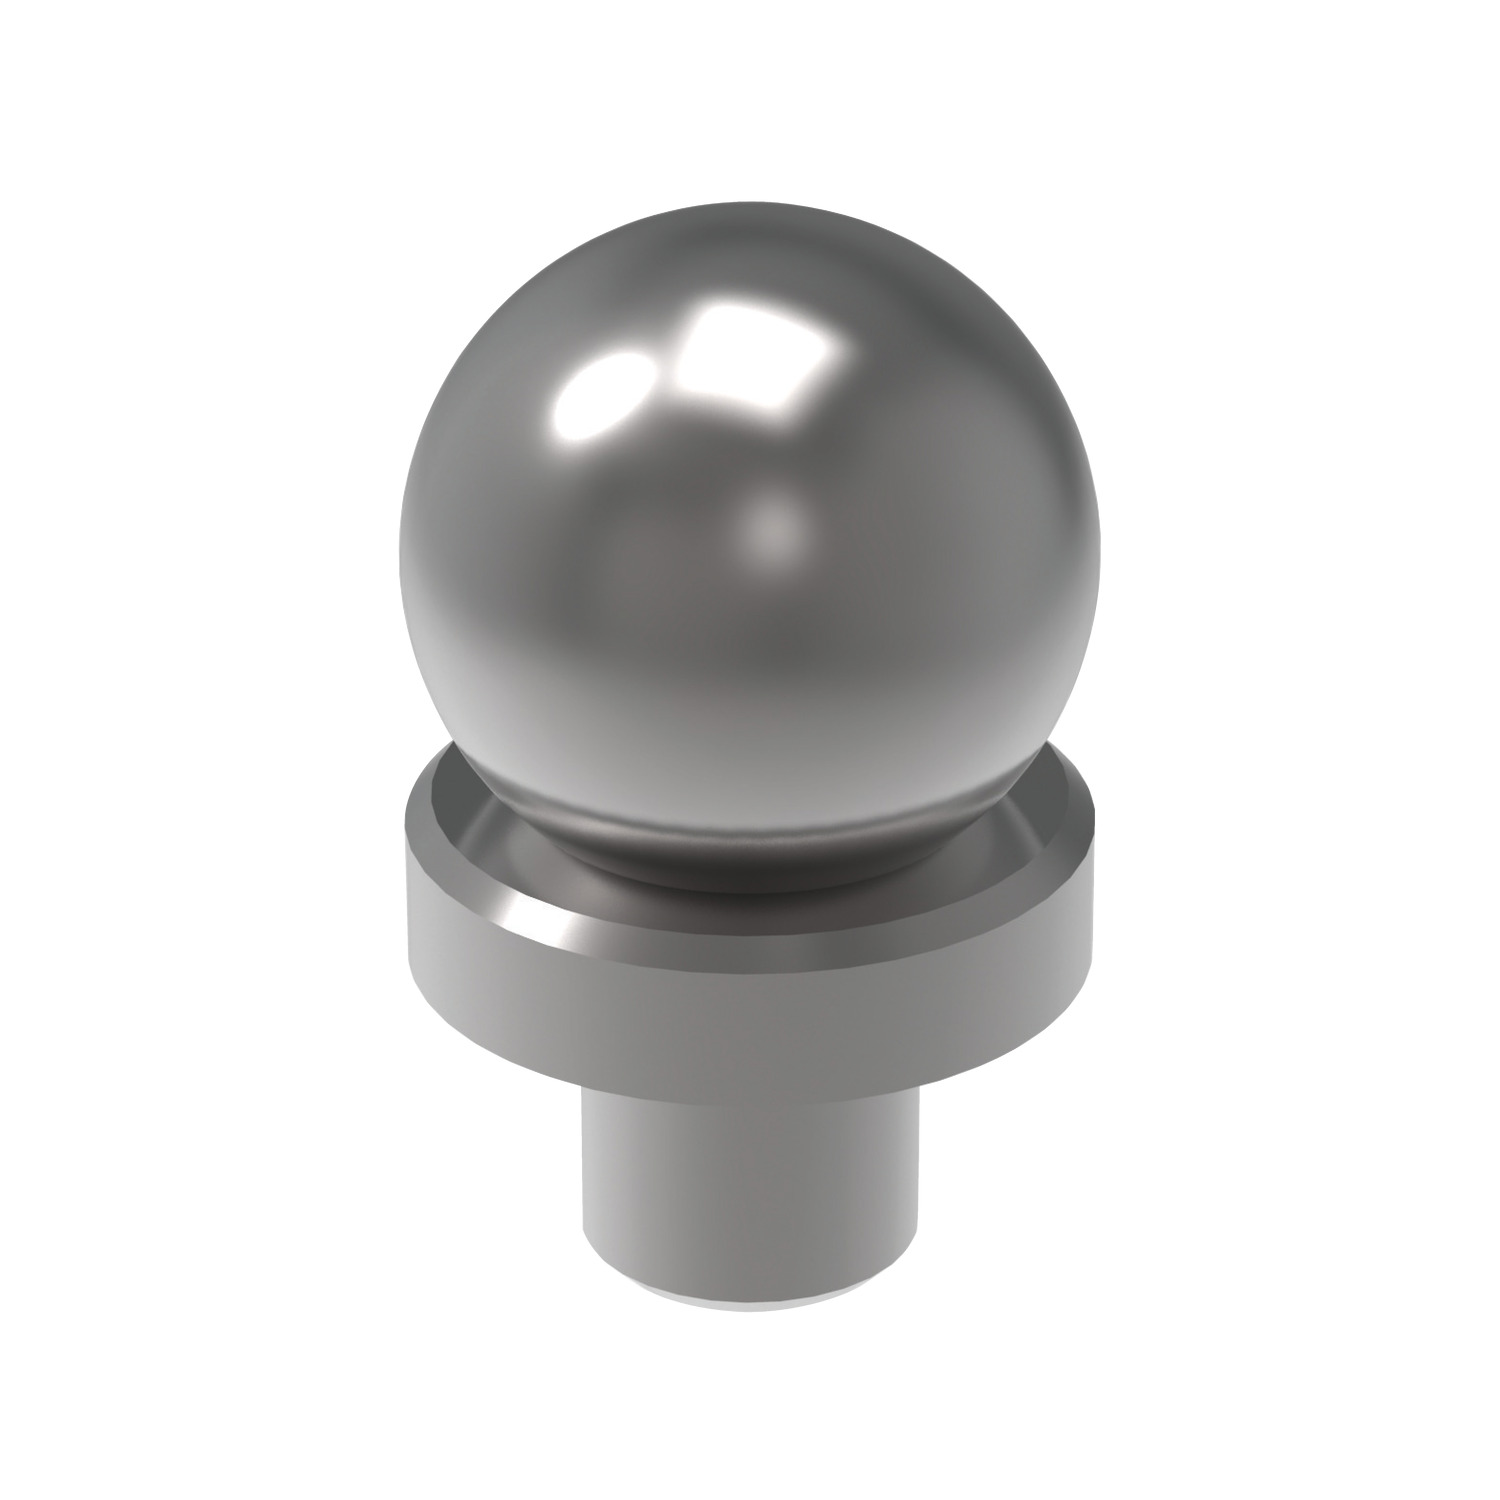 20500.W0053I Inspection Balls - Imperial - Steel. 0,5000 - 0,3750 - 1,31 - 0,3750